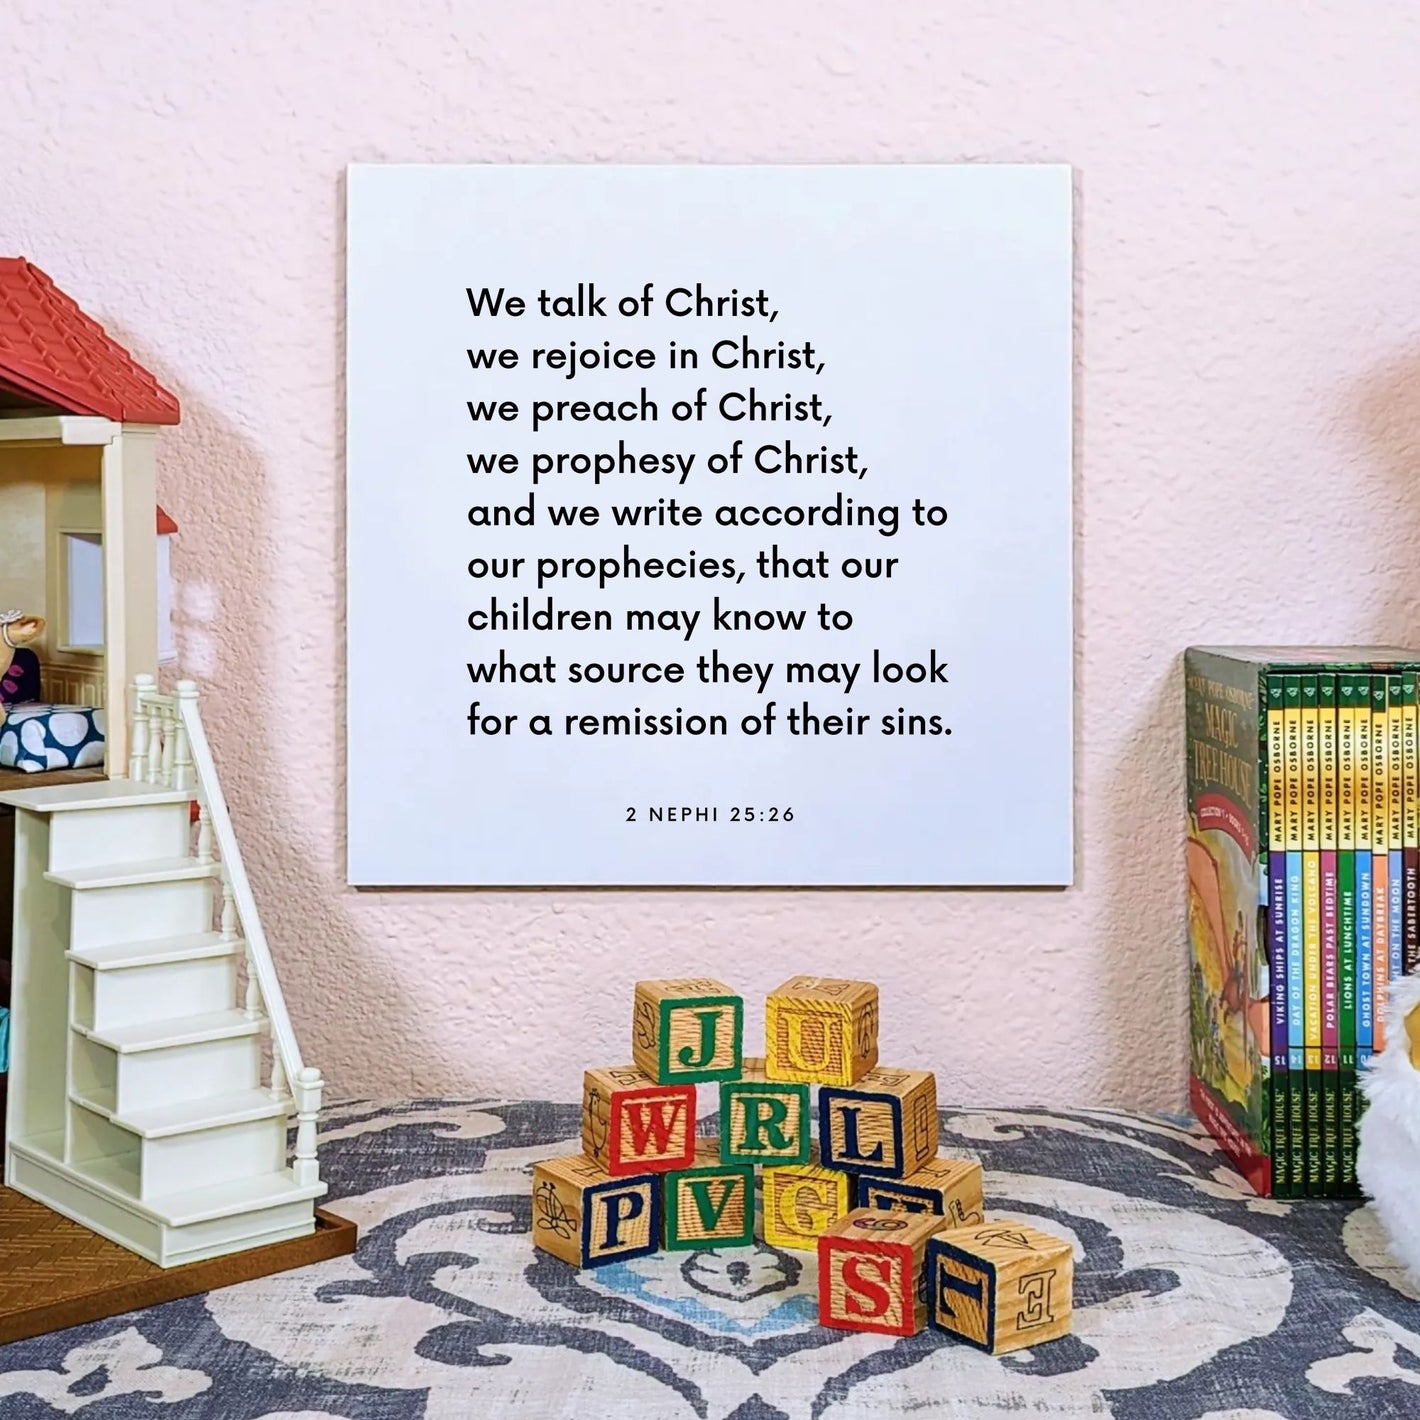 Playroom mouting of the scripture tile for 2 Nephi 25:26 - "We talk of Christ, we rejoice in Christ"